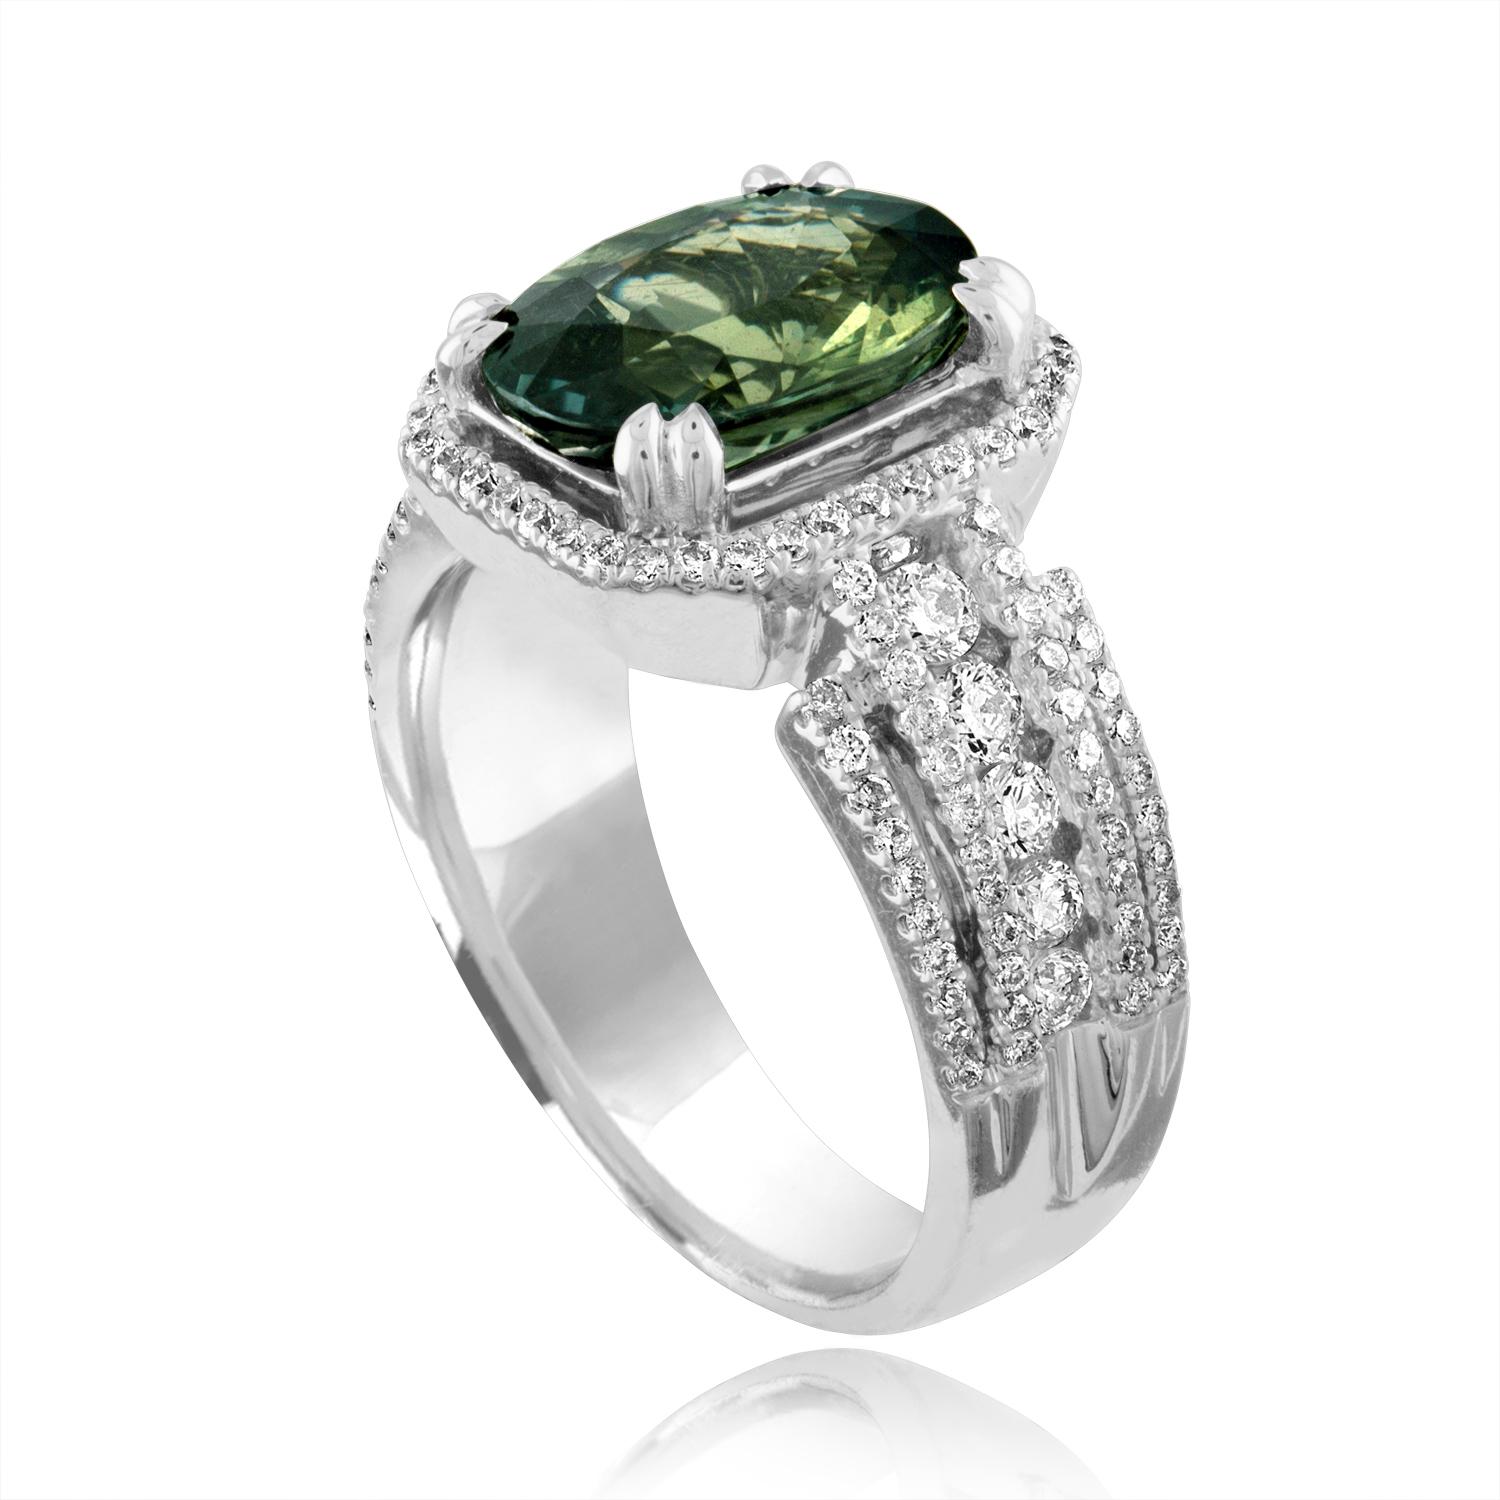 Stunningly Beautiful Bluish Yellow (Green) Sapphire Ring
The ring is 18K White Gold
The center stone is a Oval Green Sapphire 3.29 Carats
The stone is Certified by LAPIS, NO HEAT
There are 0.71 Carats in White Diamonds F/G VS/SI
The ring is a size